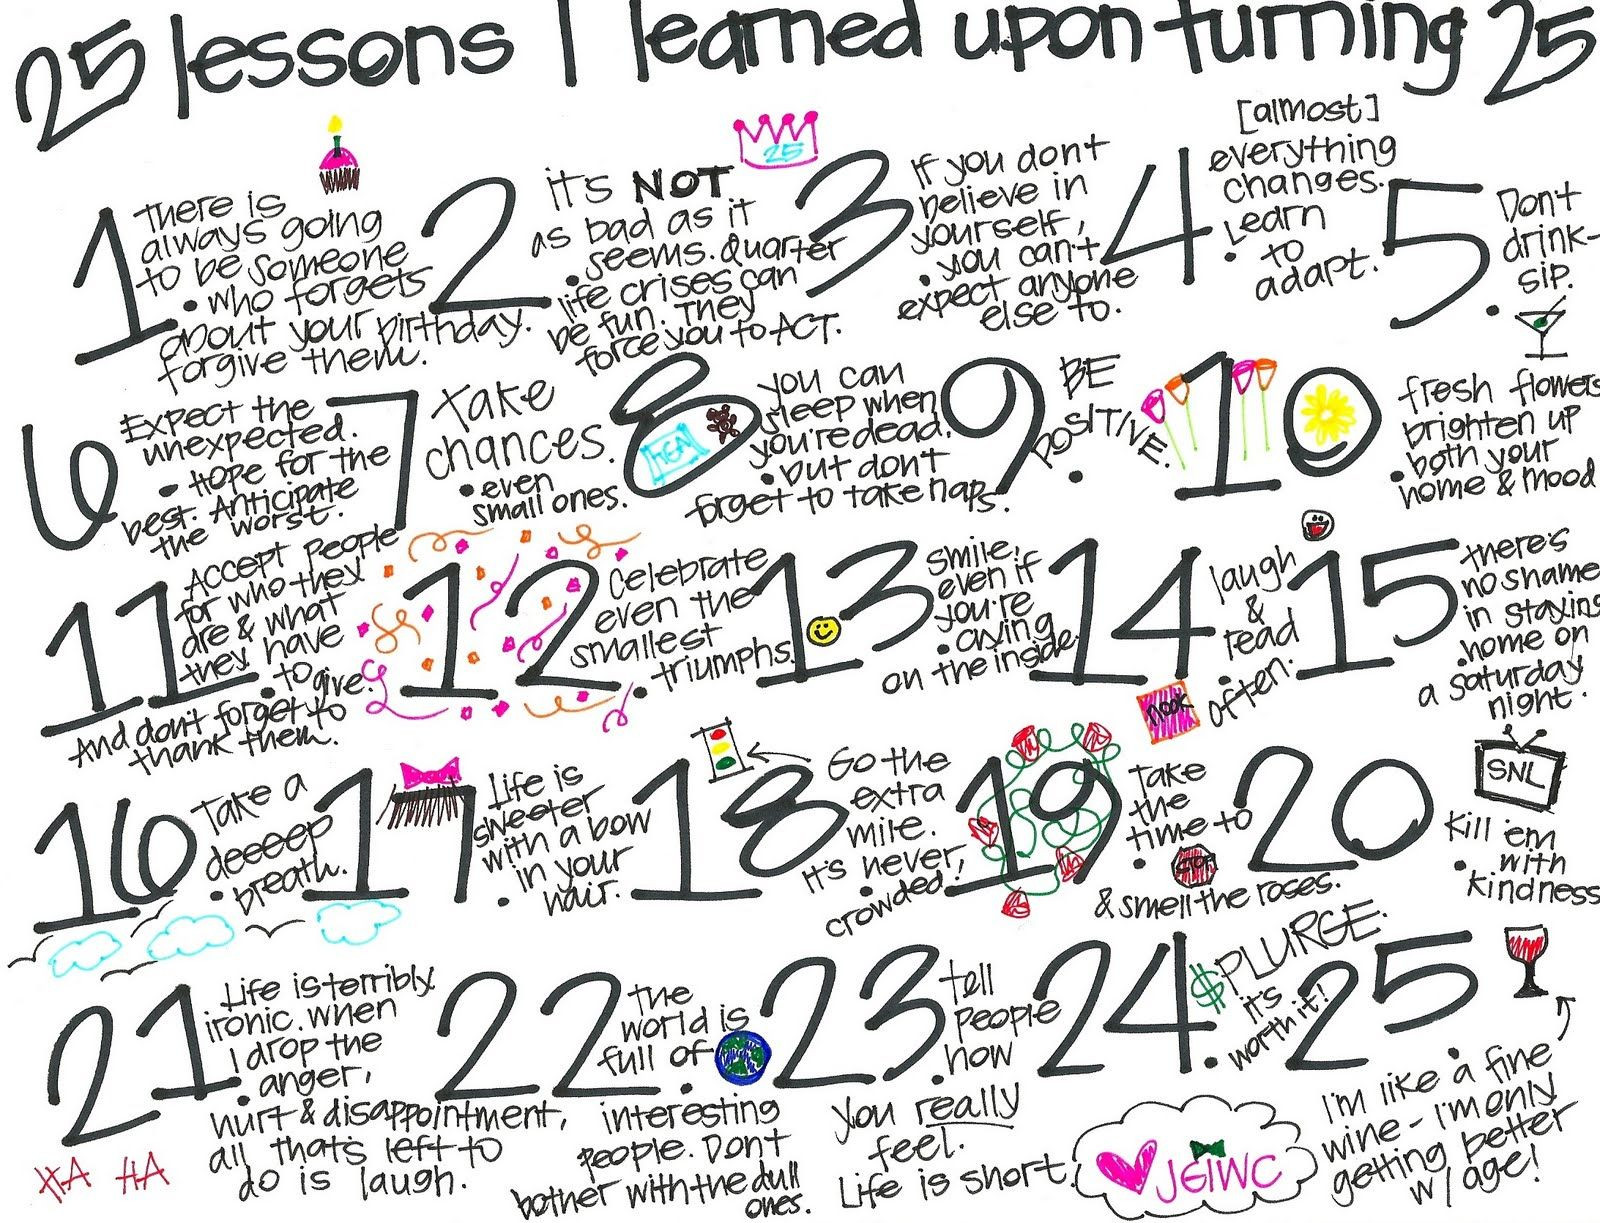 25Th Birthday Wishes
 "25 lessons I learned upon turning 25" I am proud to say